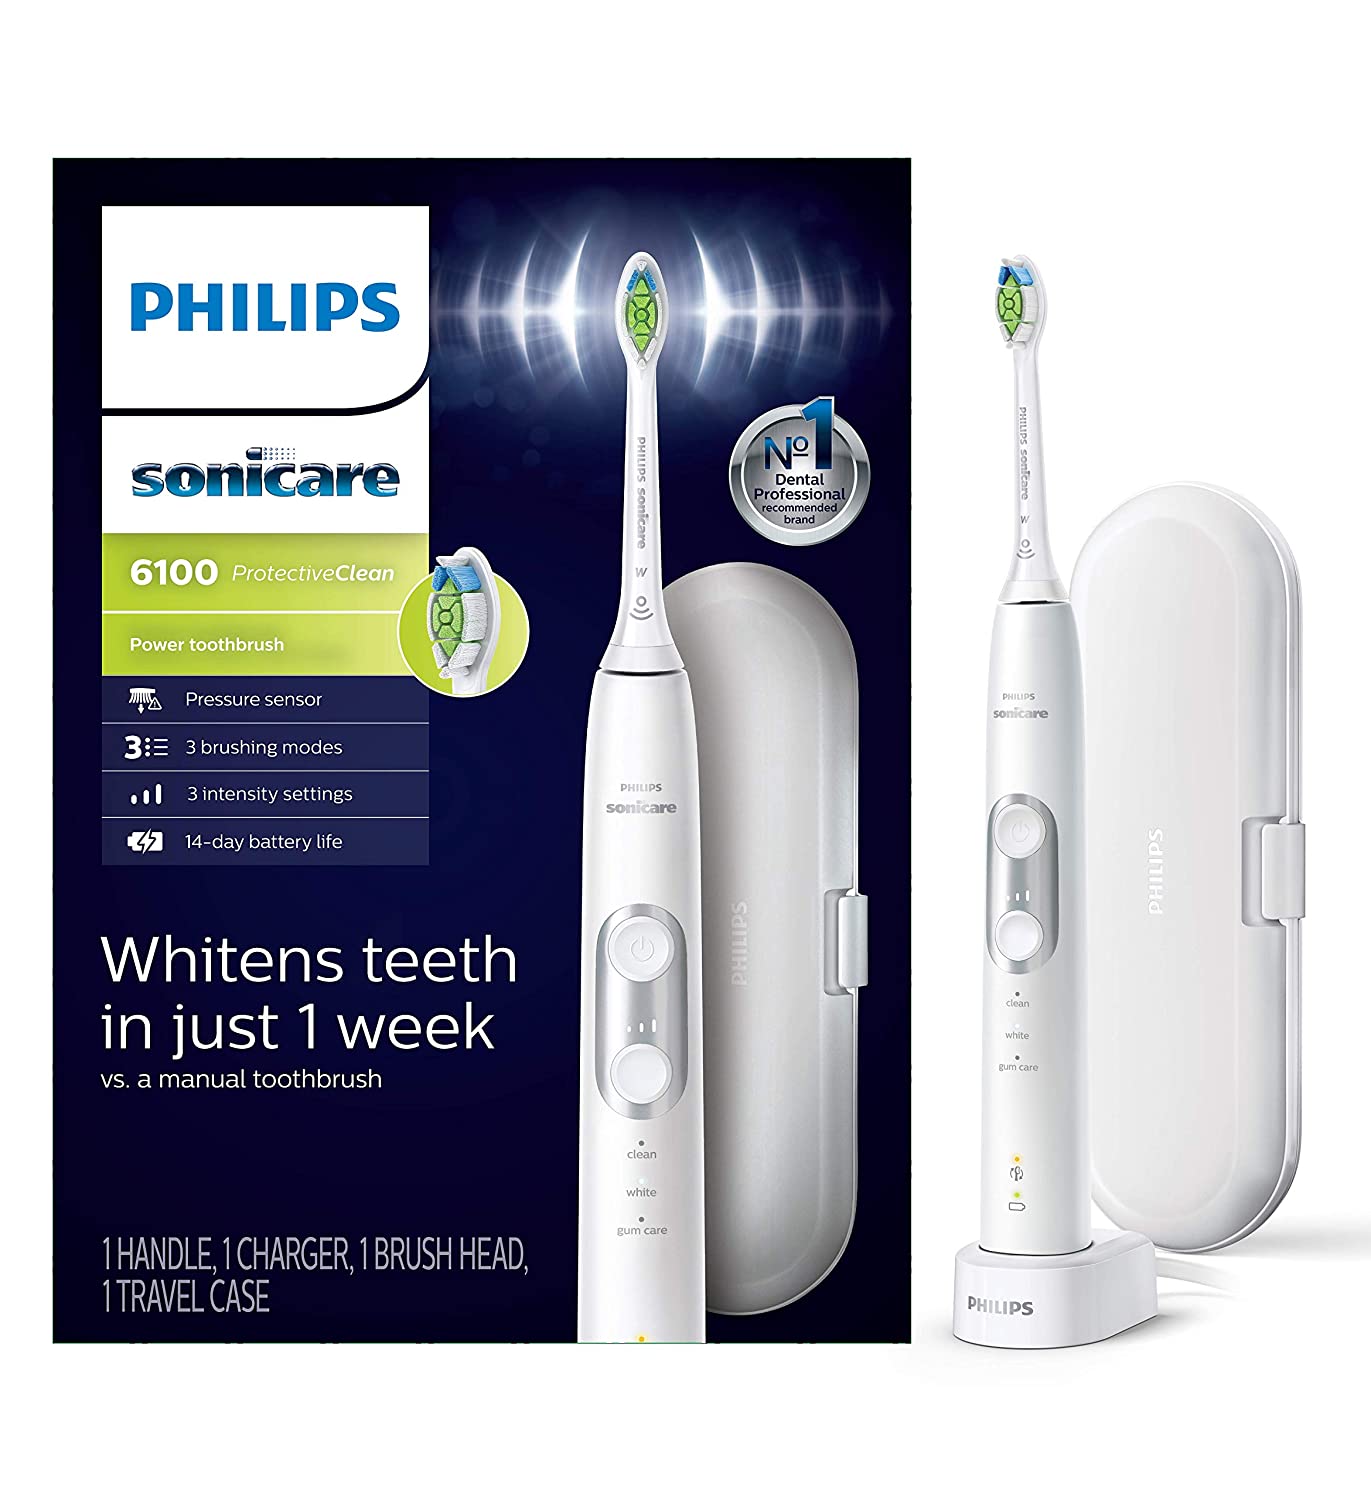 Philips Sonicare, HX687721 ProtectiveClean 6100 Rechargeable Electric Toothbrush, $79.95 + Free Shipping